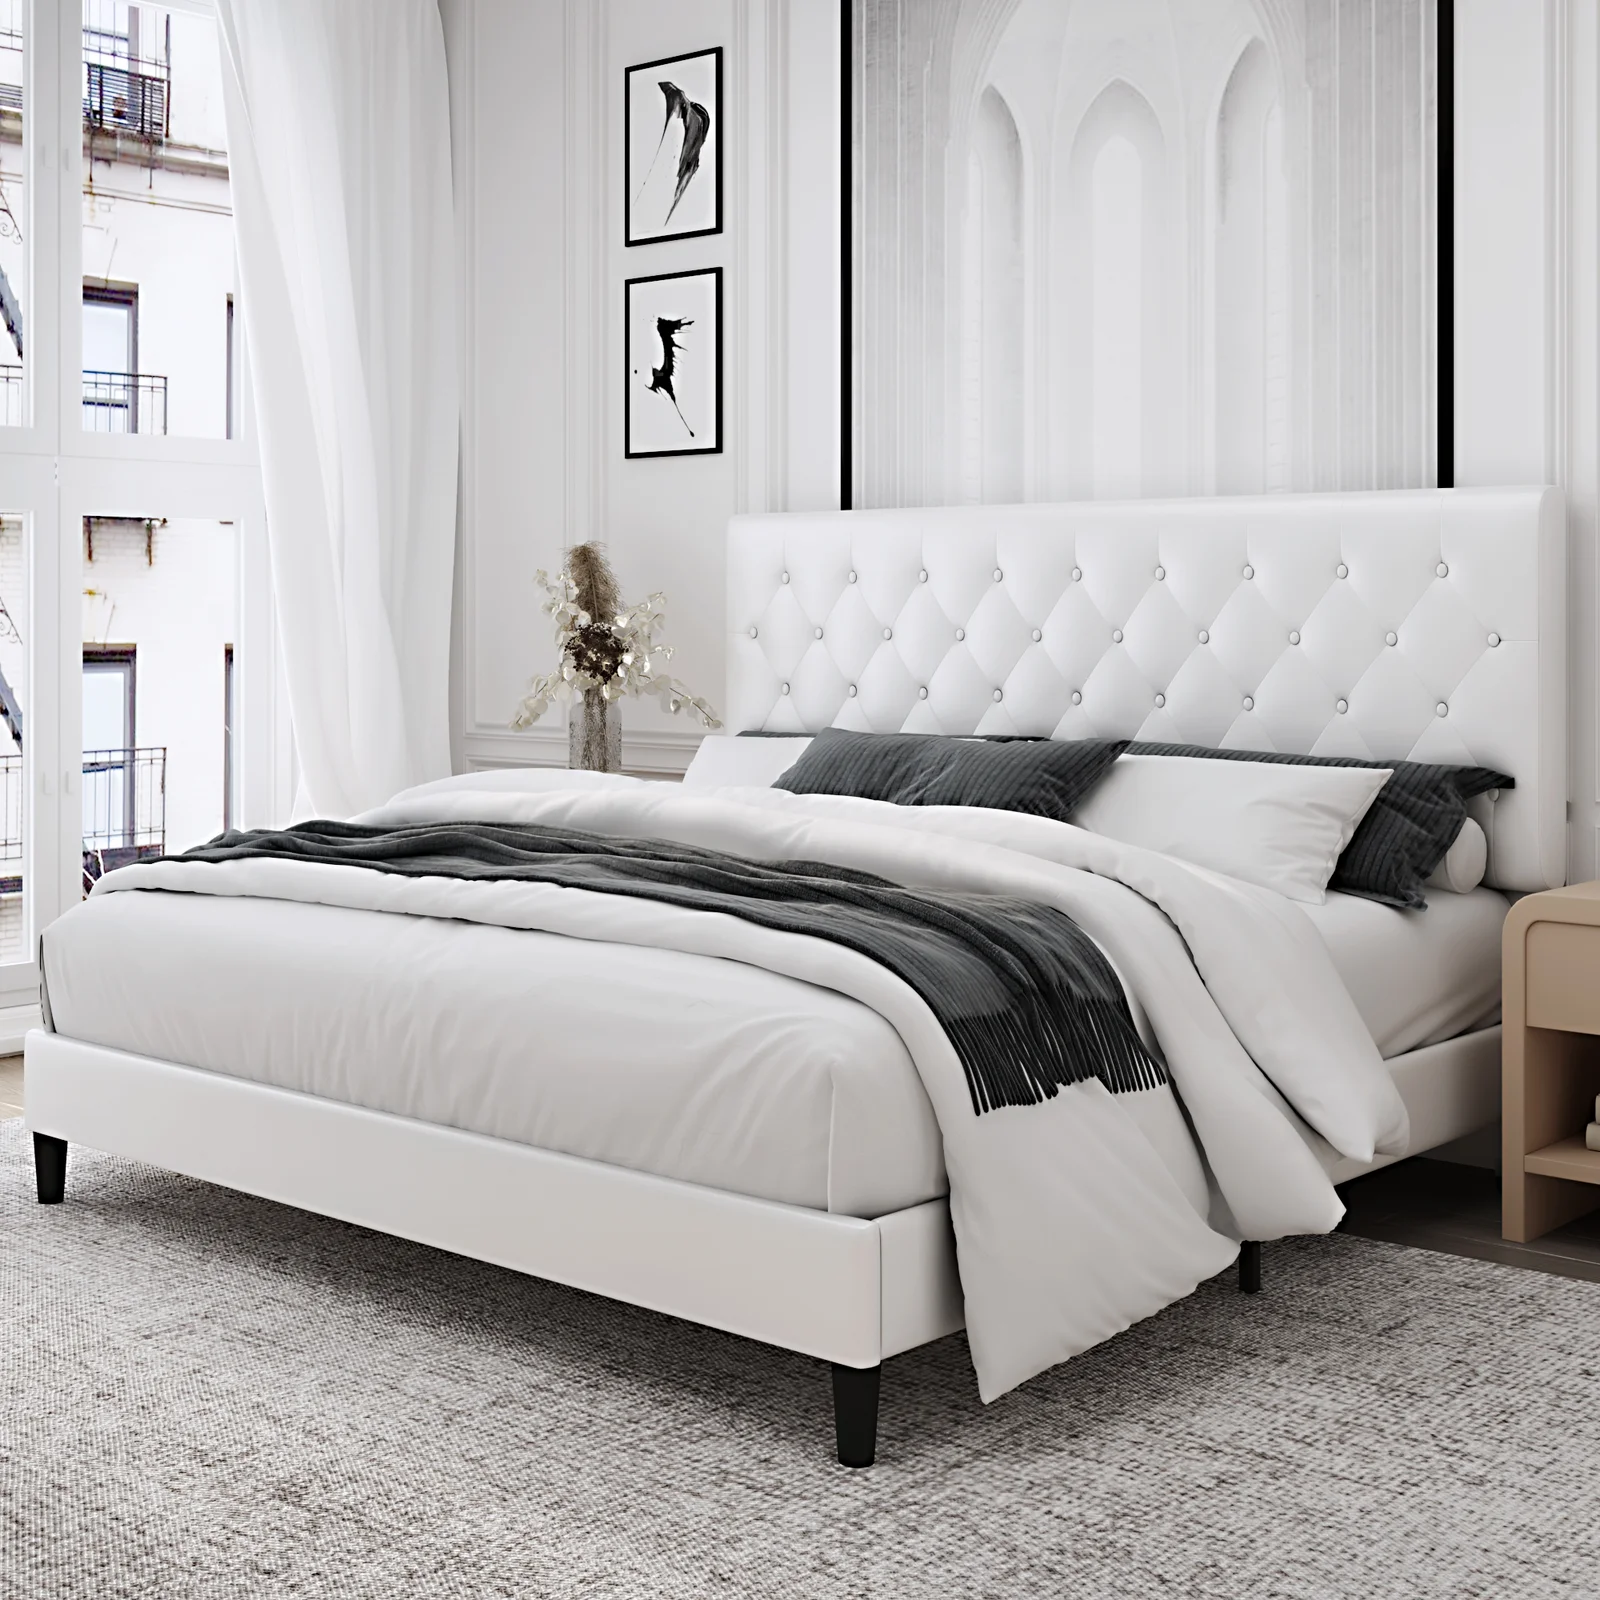 Homfa King Bed Frame, White Faux Leather Upholstered Button Tufted Low Profile Platform Bed Frame with Adjustable Headboard for Bedroom - image 1 of 8